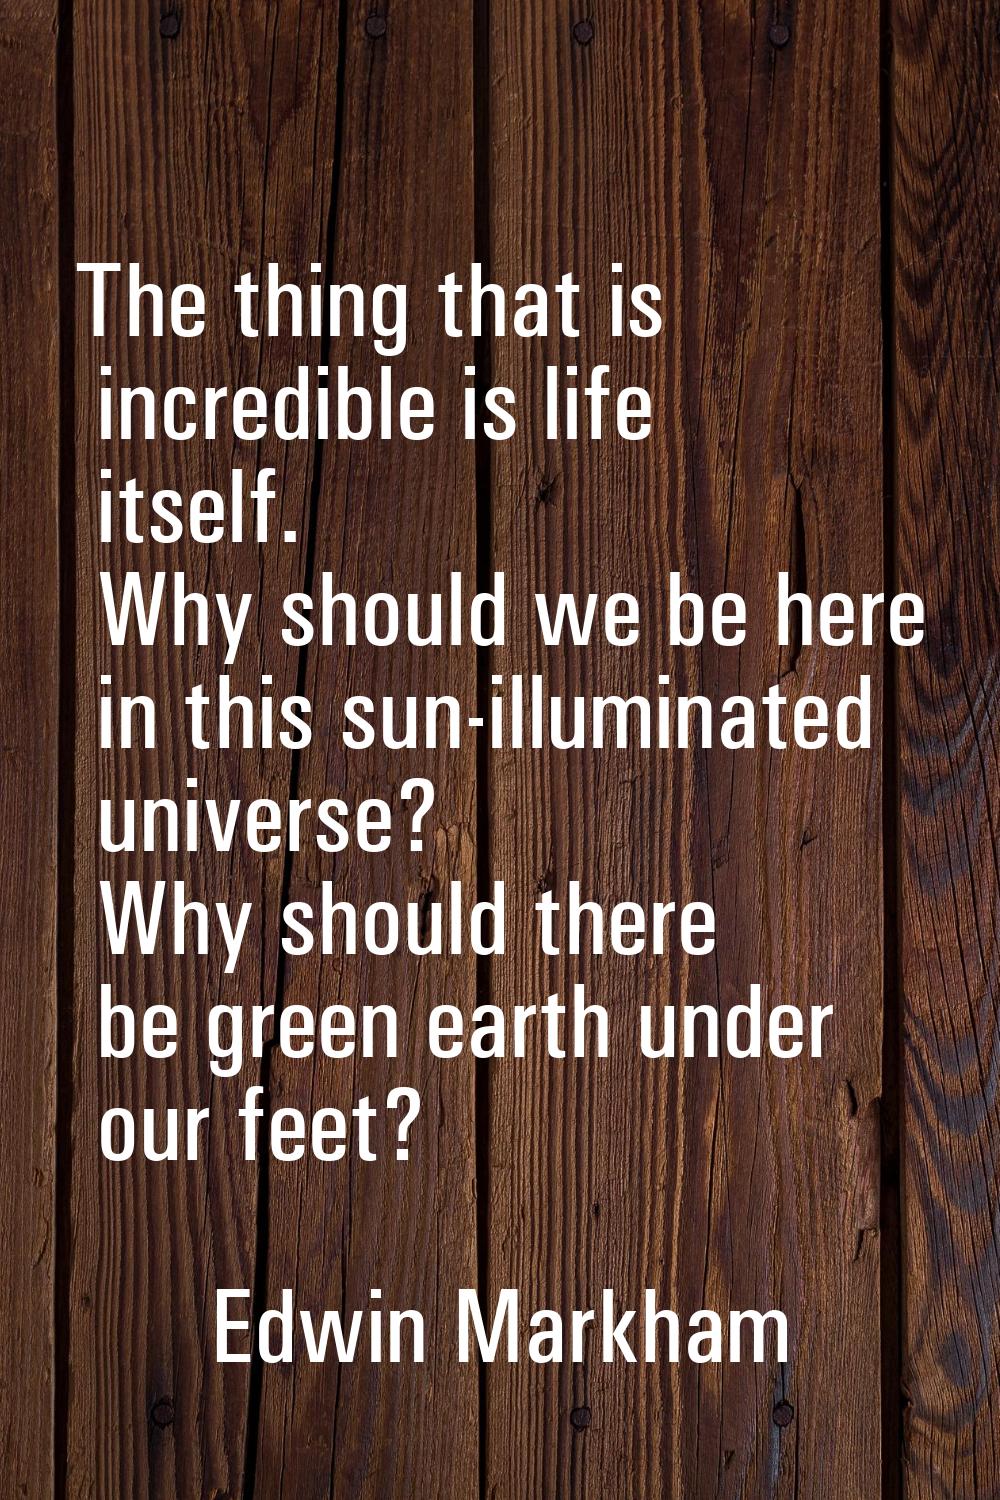 The thing that is incredible is life itself. Why should we be here in this sun-illuminated universe